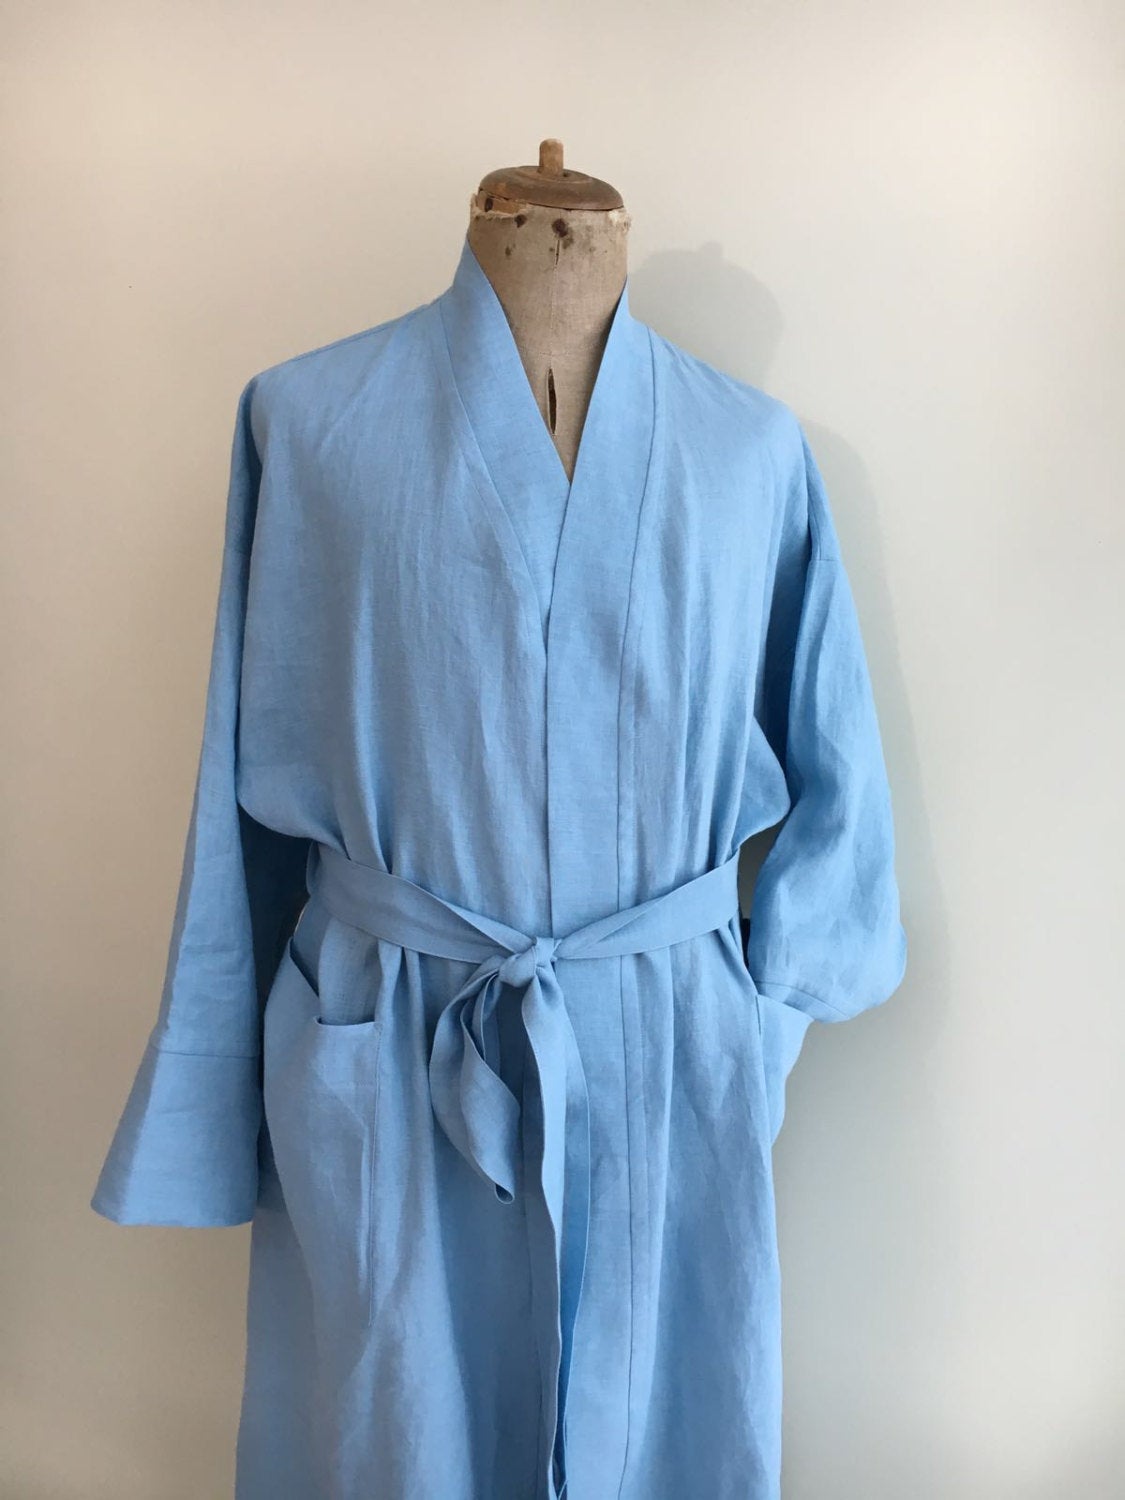 Womens Terry Toweling Cotton Bathrobe Dressing Gown Robe-Blue -